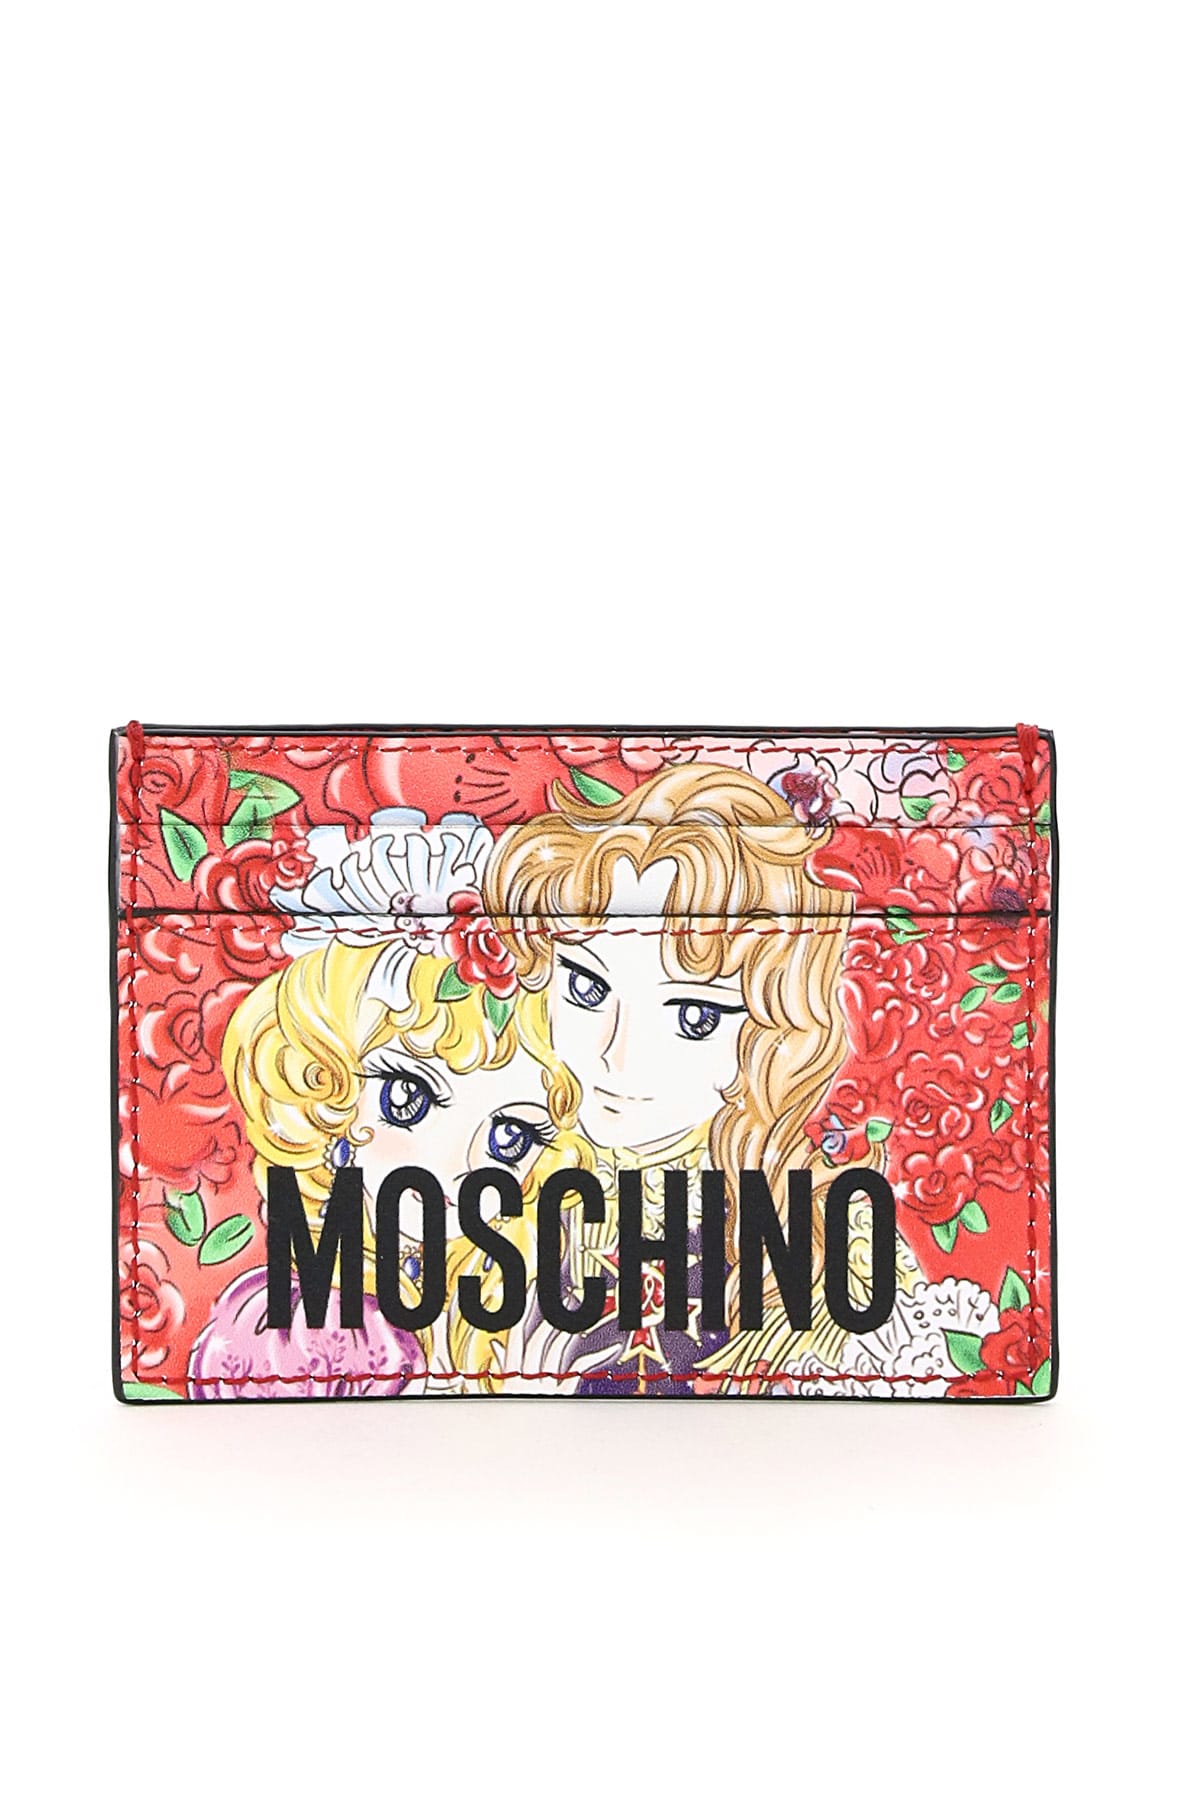 MOSCHINO MARIE ANTOINETTE LEATHER CARD HOLDER LADY OSCAR PRINT